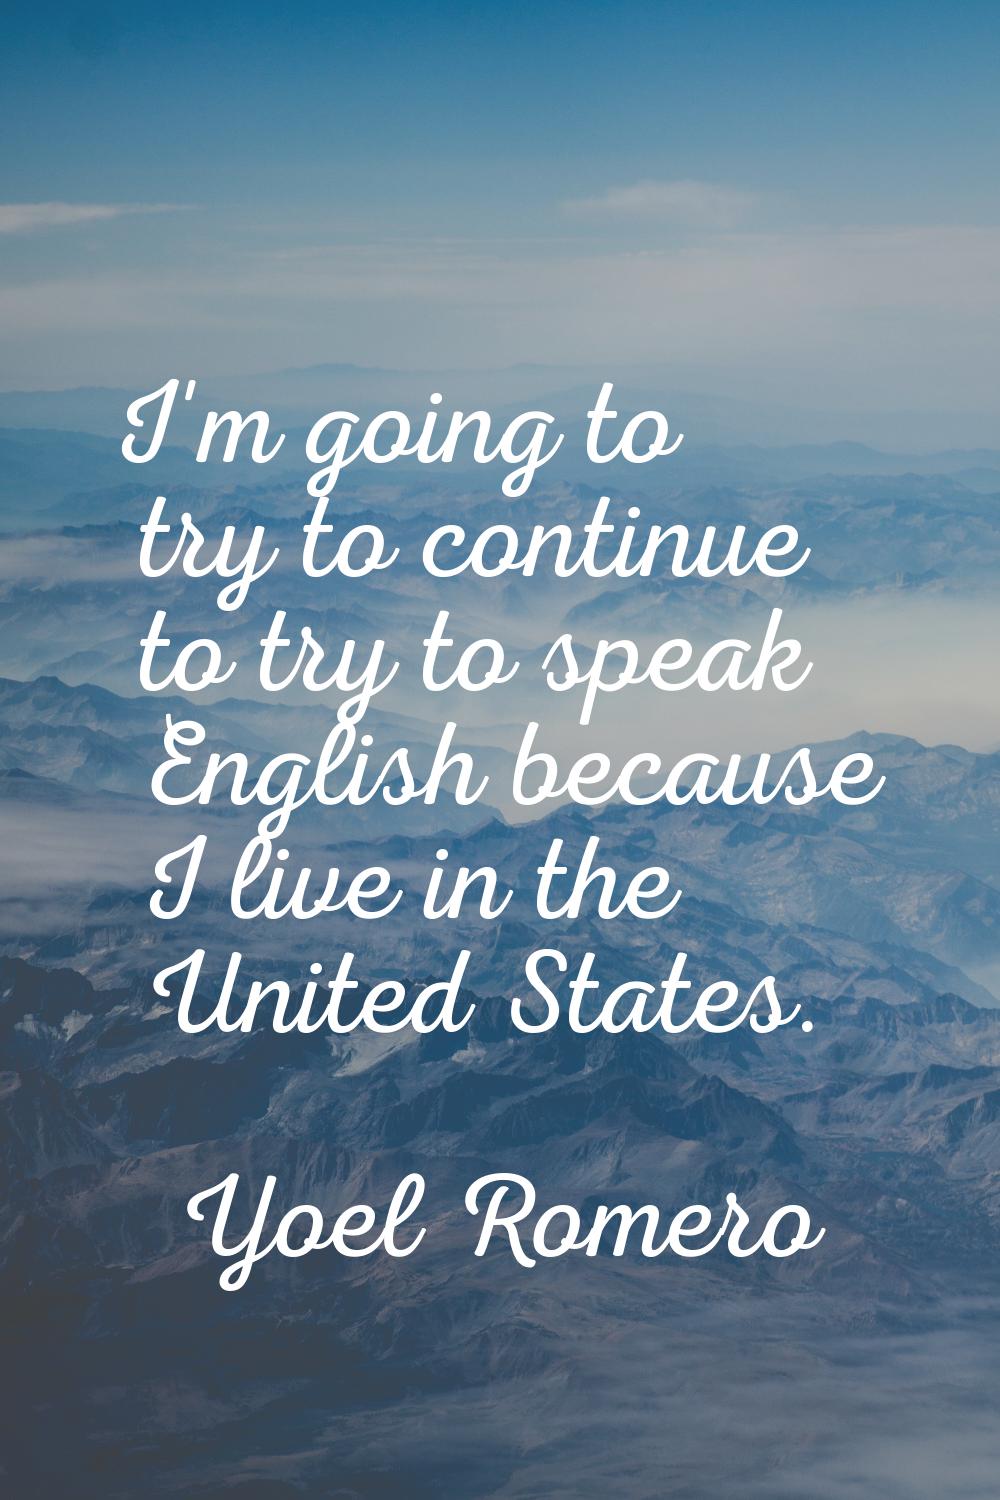 I'm going to try to continue to try to speak English because I live in the United States.